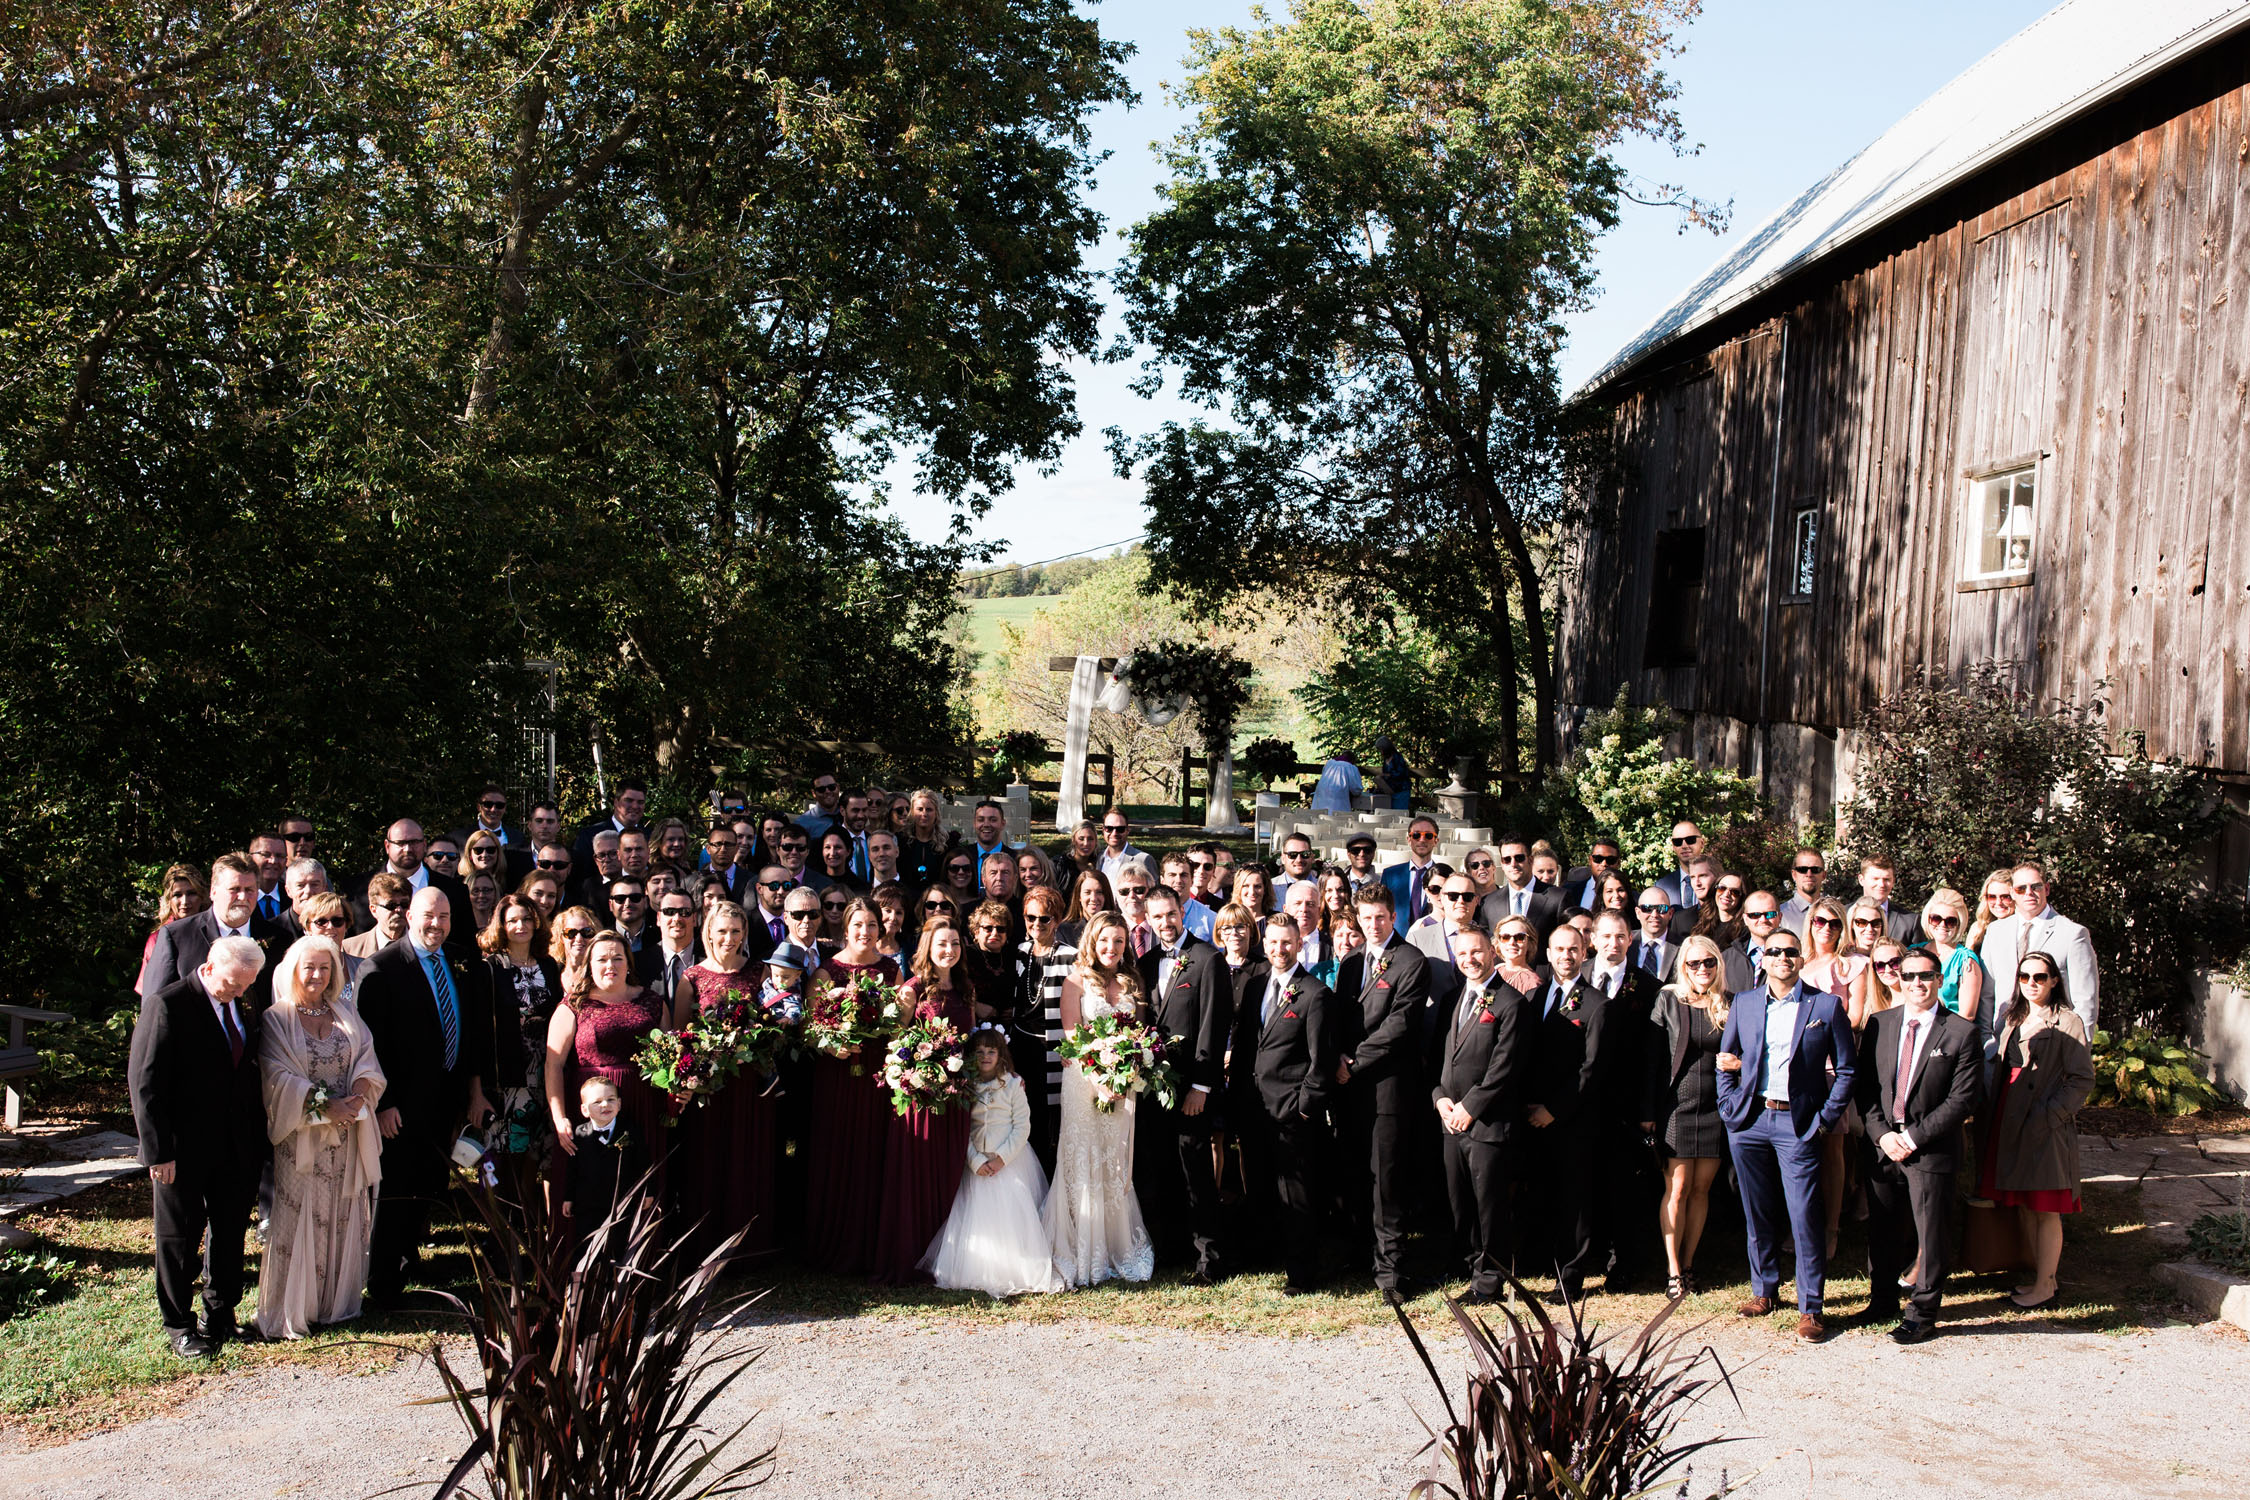 The entire wedding party and all the guests gather together for photo op!